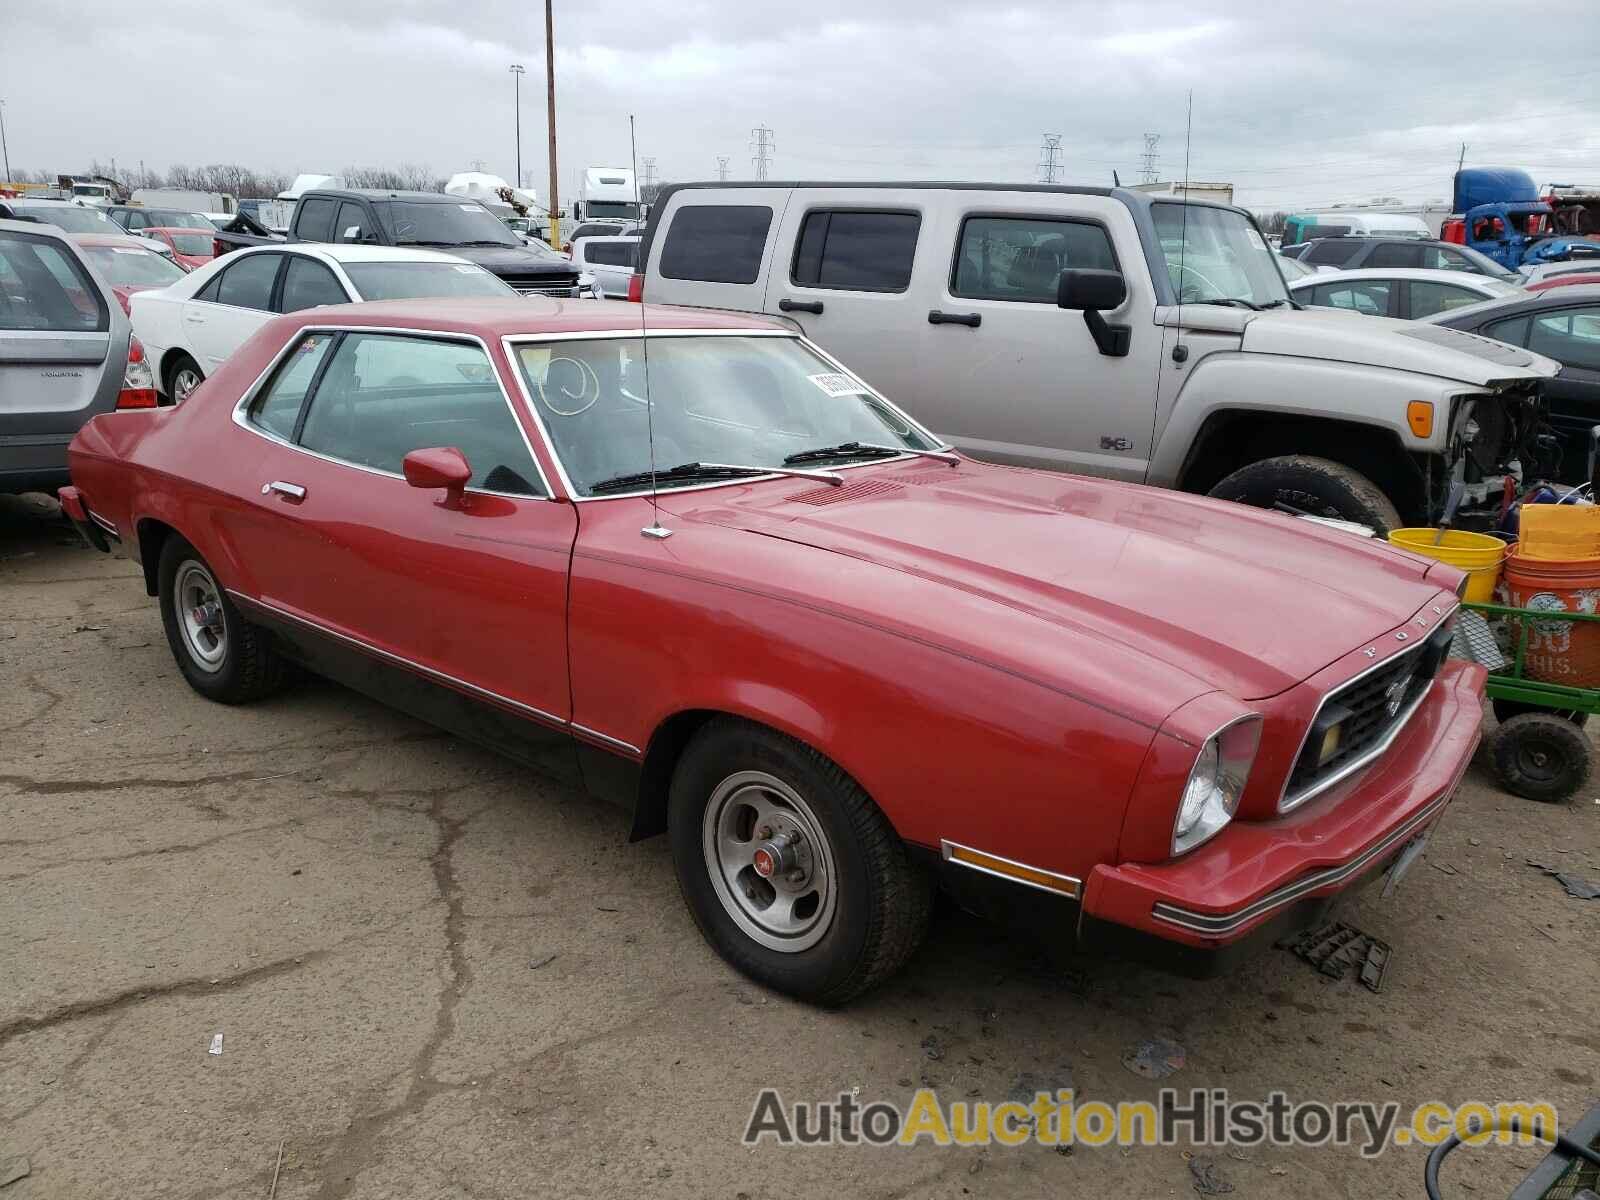 1978 FORD MUSTANG, 8F02Y273183